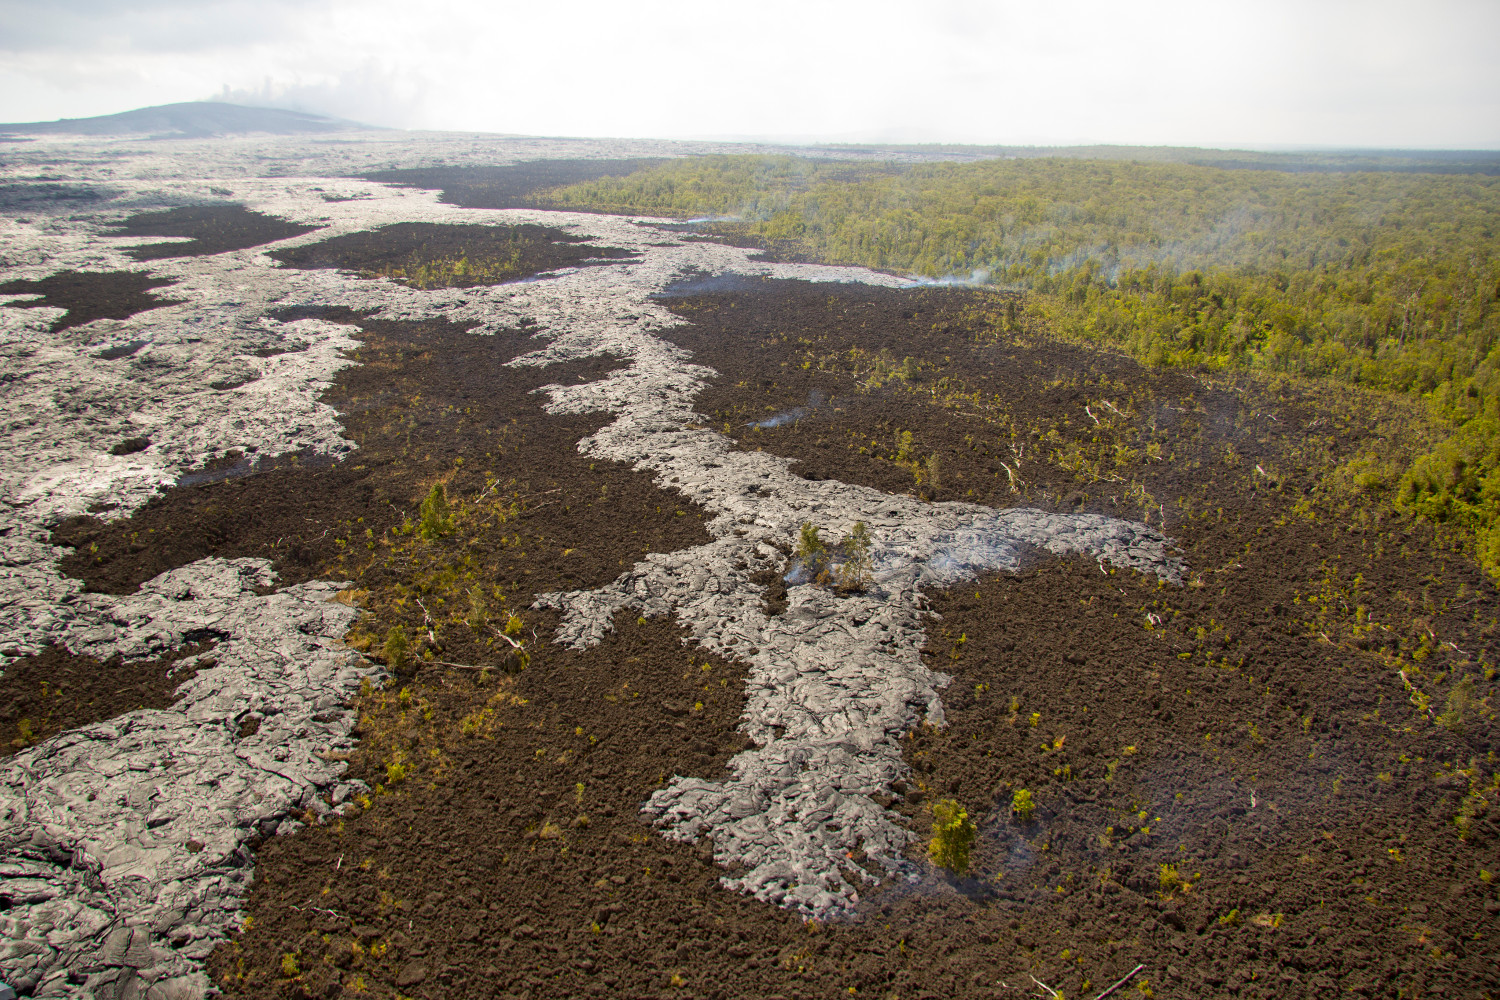 Wide view of the breakout 2 miles from Pu'u O'o, by USGS HVO.